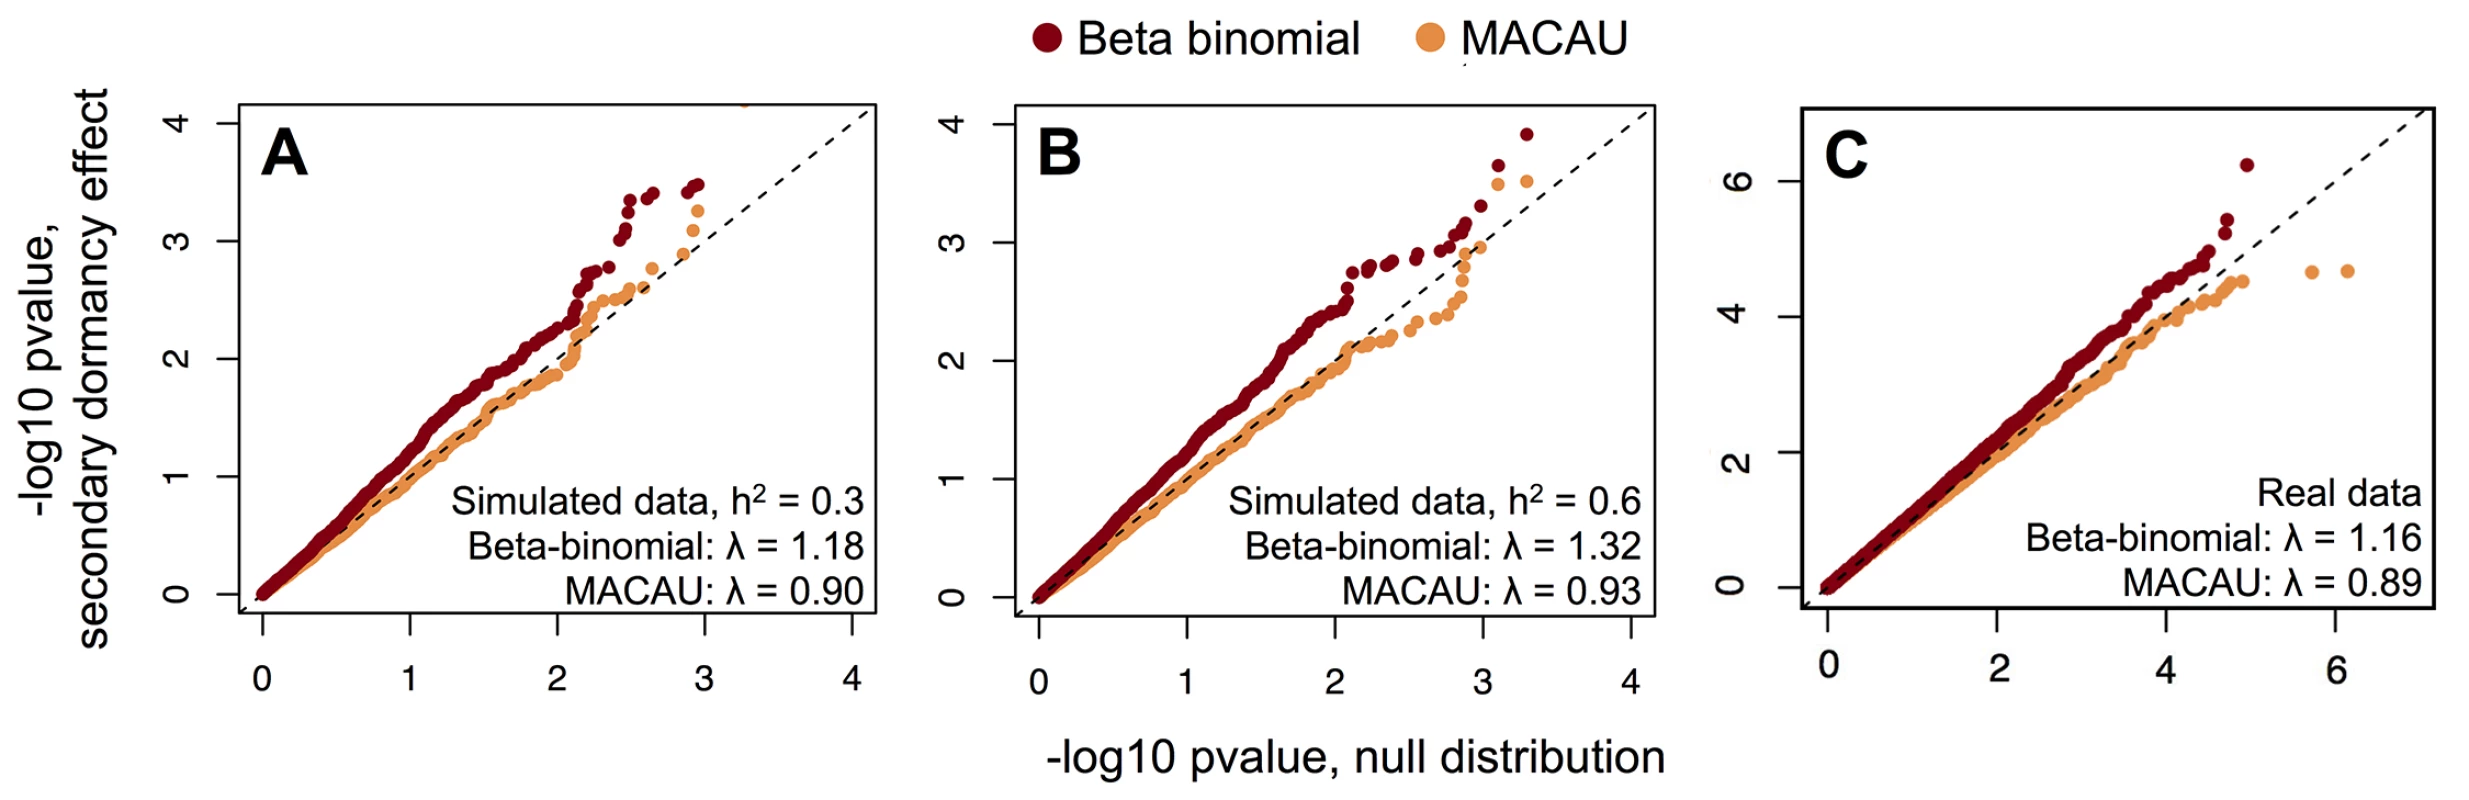 MACAU appropriately controls for genetic covariance in simulated and real WGBS data and eliminates false positive identification of differentially methylated sites.